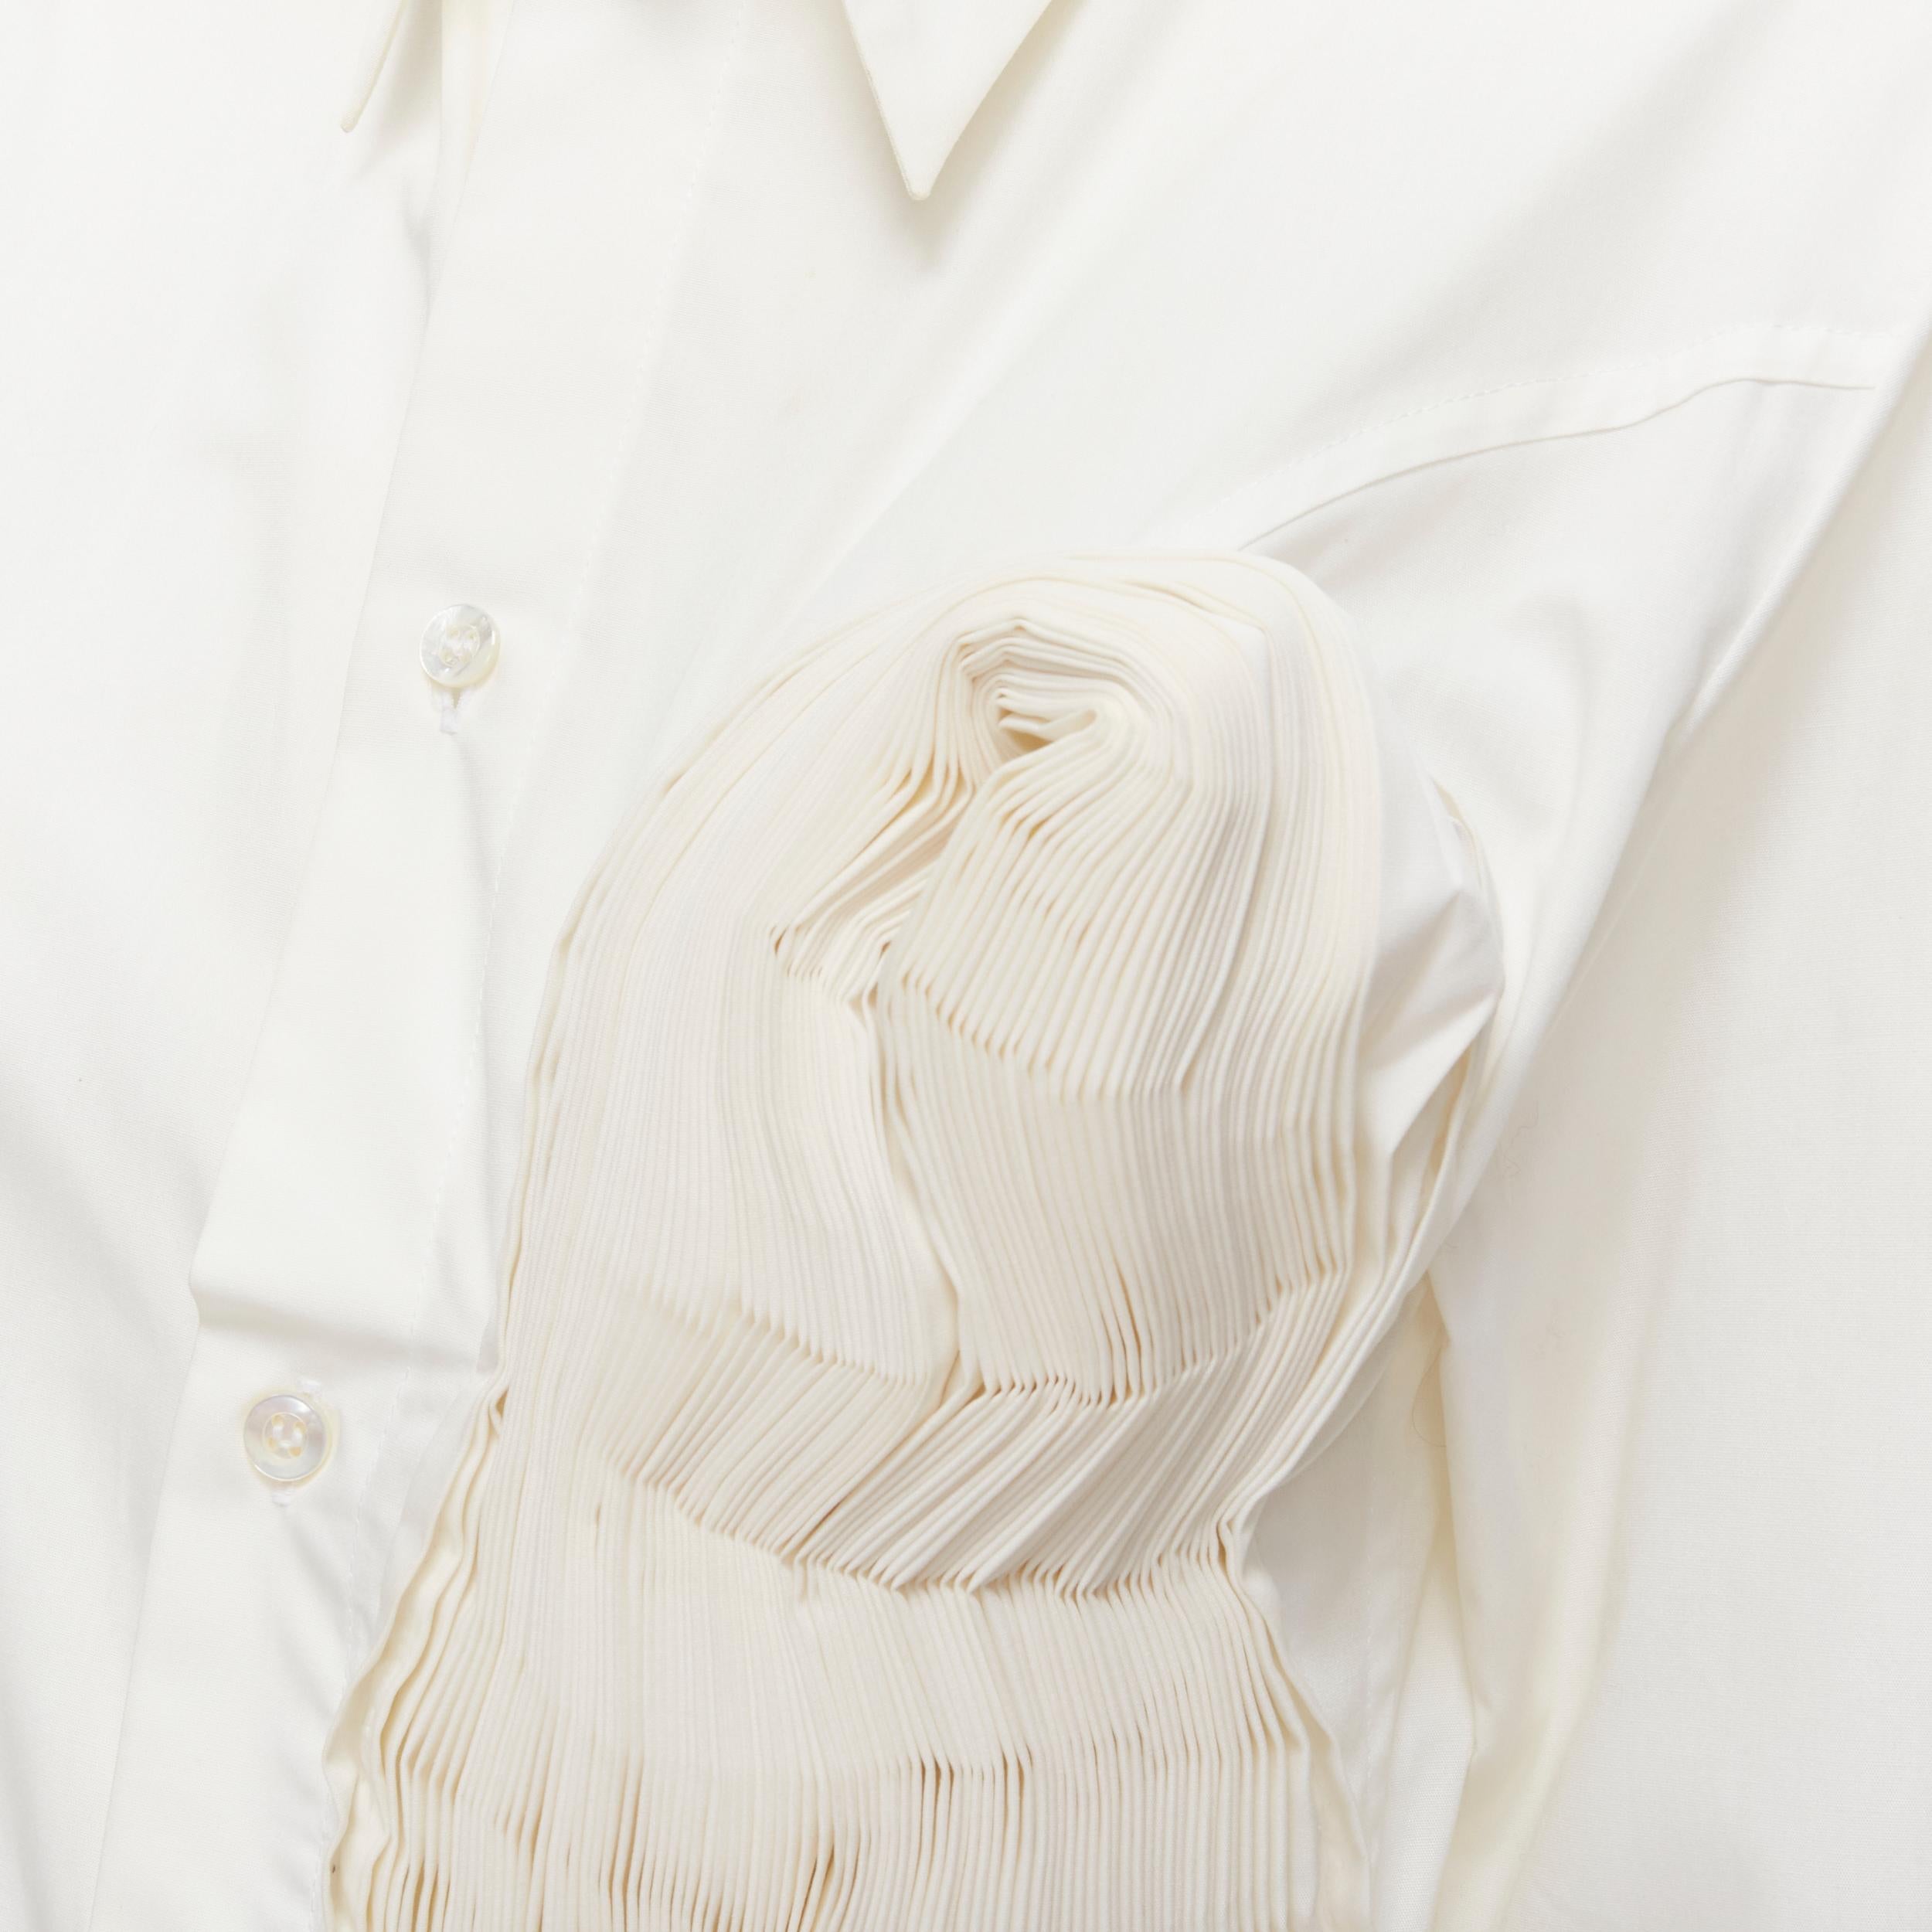 YOHJI YAMAMOTO 2015 white Madam Gres inspired knife pleat shirt 
Reference: CRTI/A00576 
Brand: Yohji Yamamoto 
Collection: 2015 
Material: Cotton 
Color: White 
Pattern: Solid 
Closure: Button 
Extra Detail: Mother of pearl buttons. Curved seam at